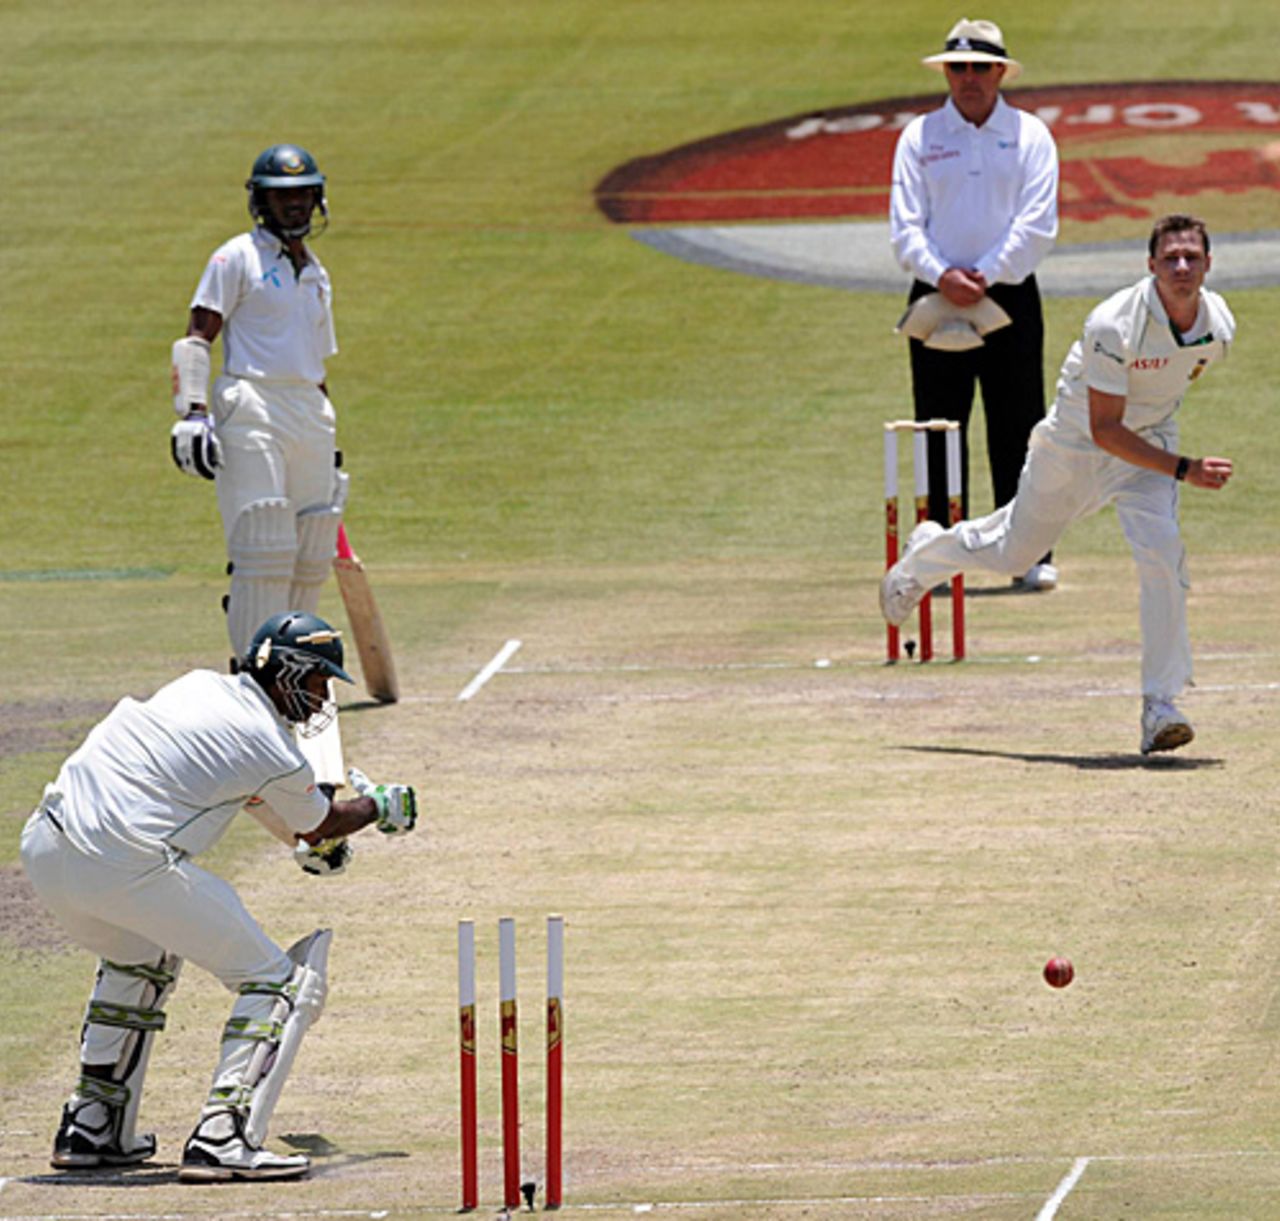 How not to play the yorker: Shahadat Hossain gives himself room and is bowled, South Africa v Bangladesh, 1st Test, Bloemfontein, November 22, 2008